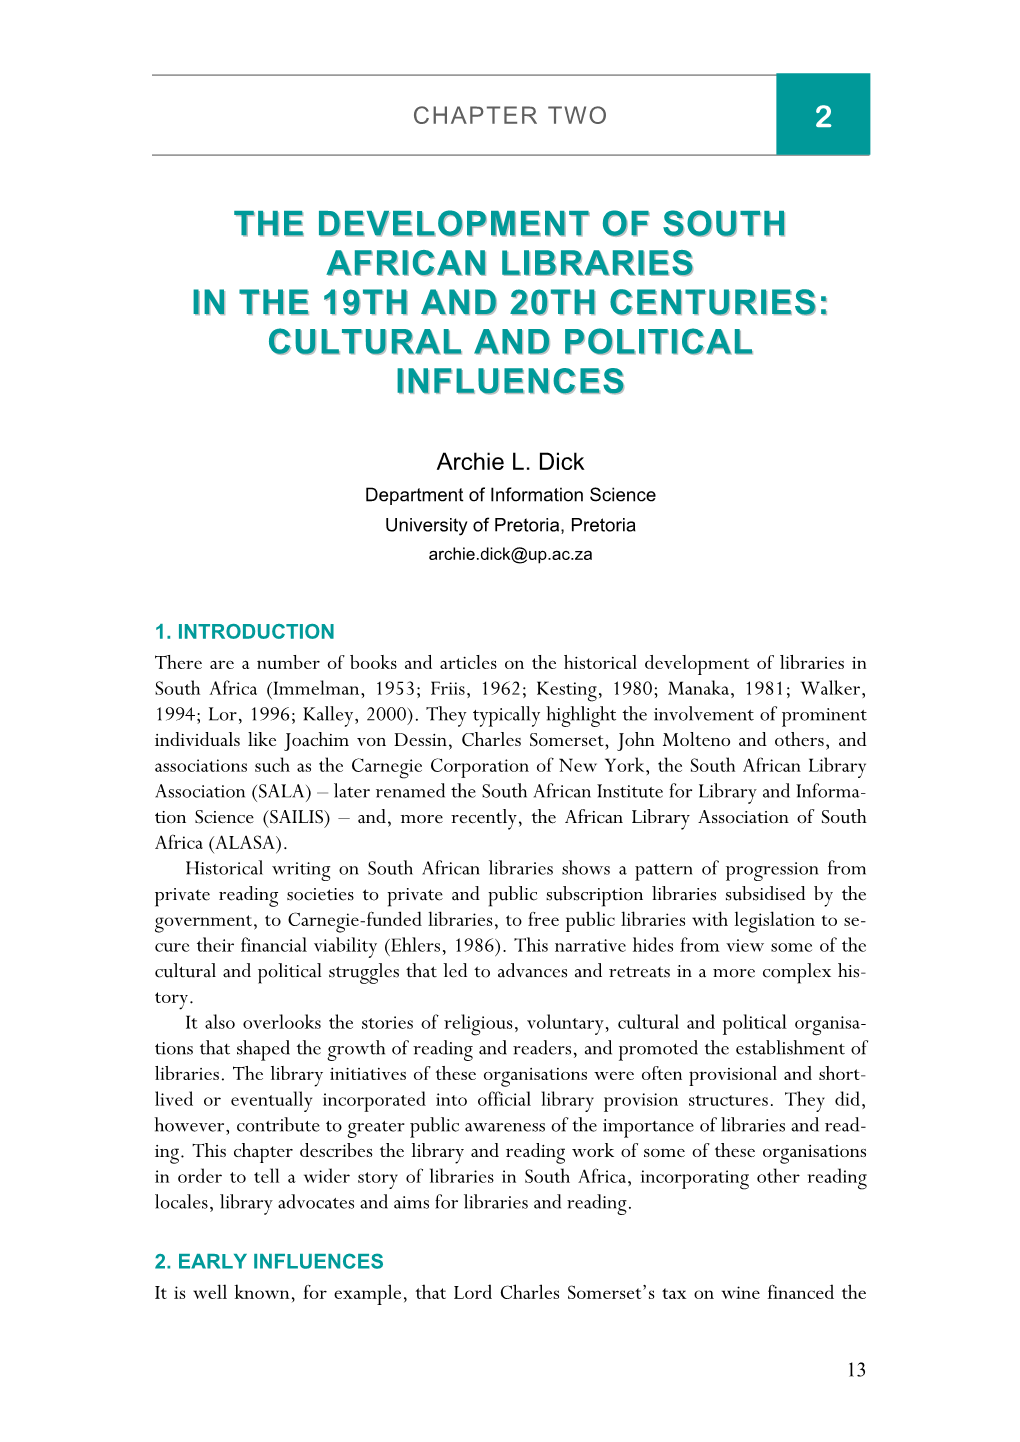 The Development of South African Libraries in the 19Th and 20Th Centuries: Cultural and Political Influences